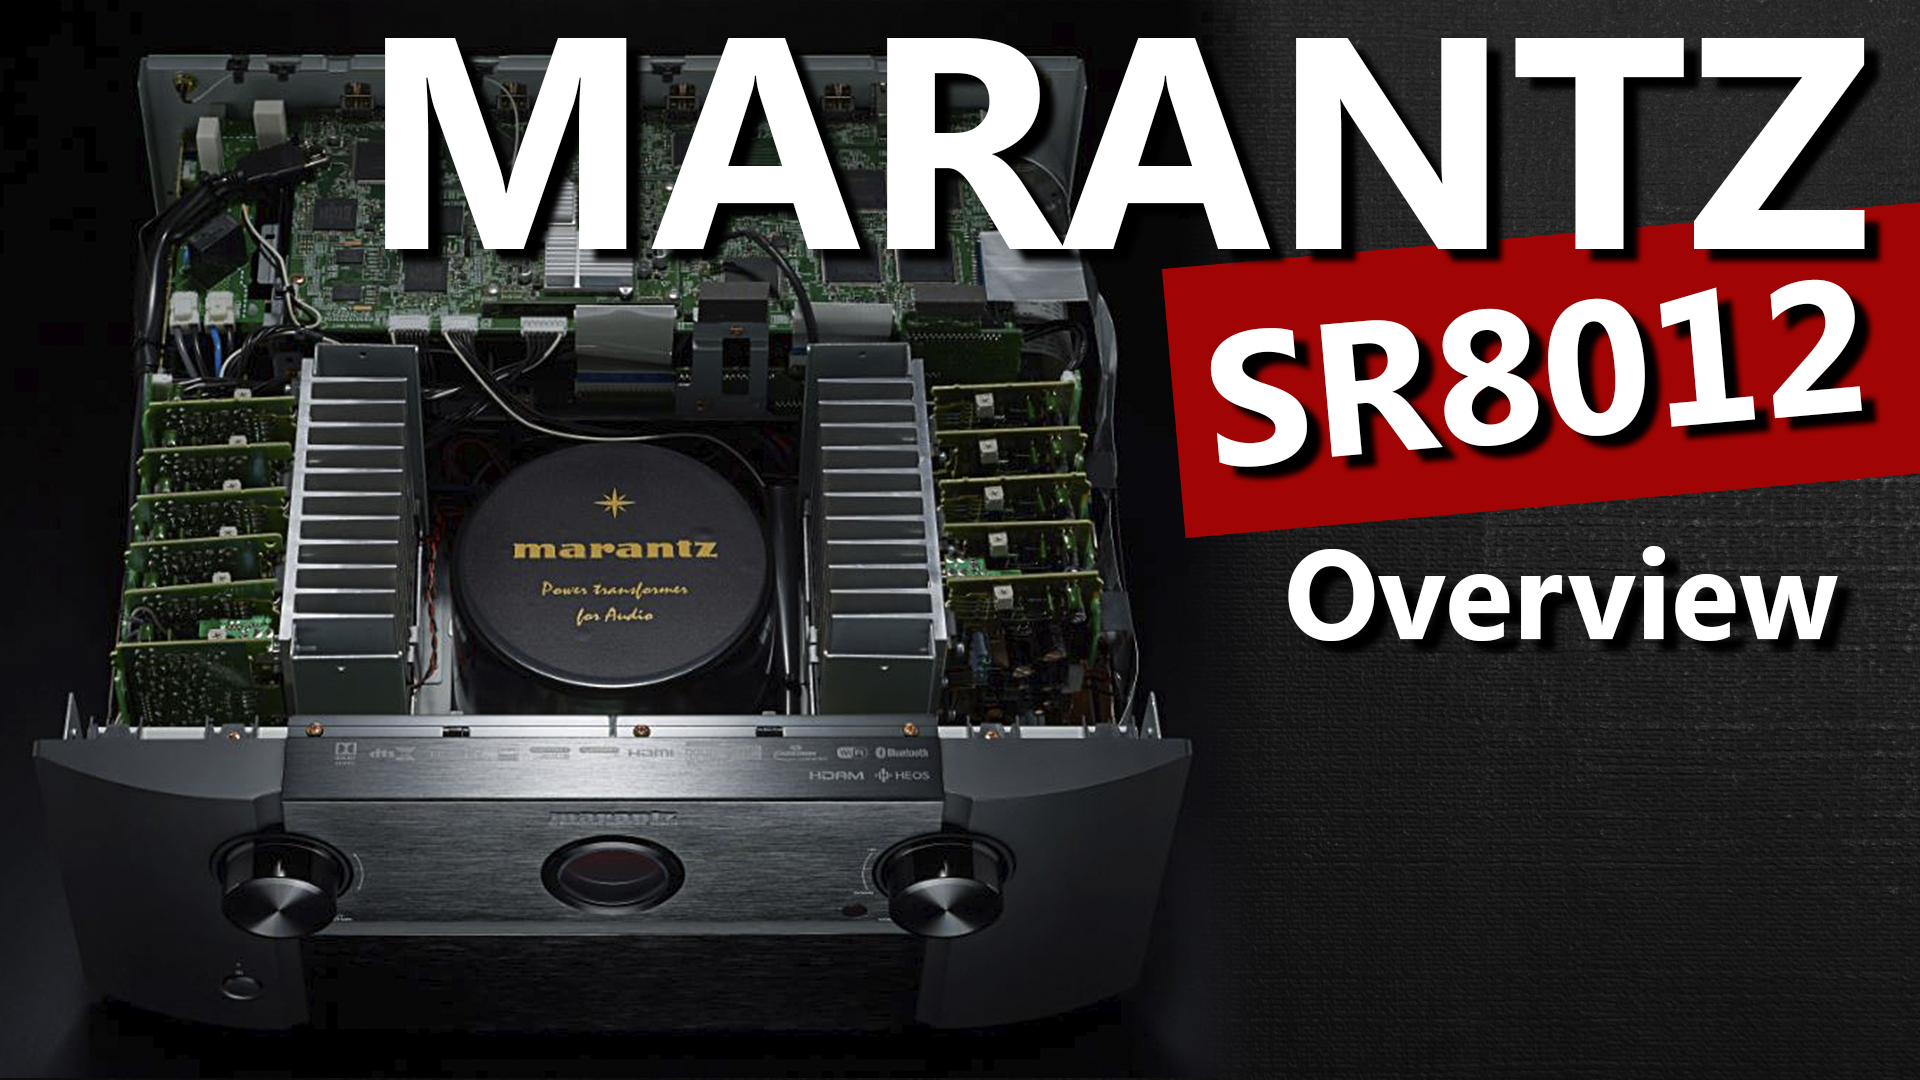 Marantz SR8012 11.2 Dolby Atmos Receiver - Unboxing and Overview